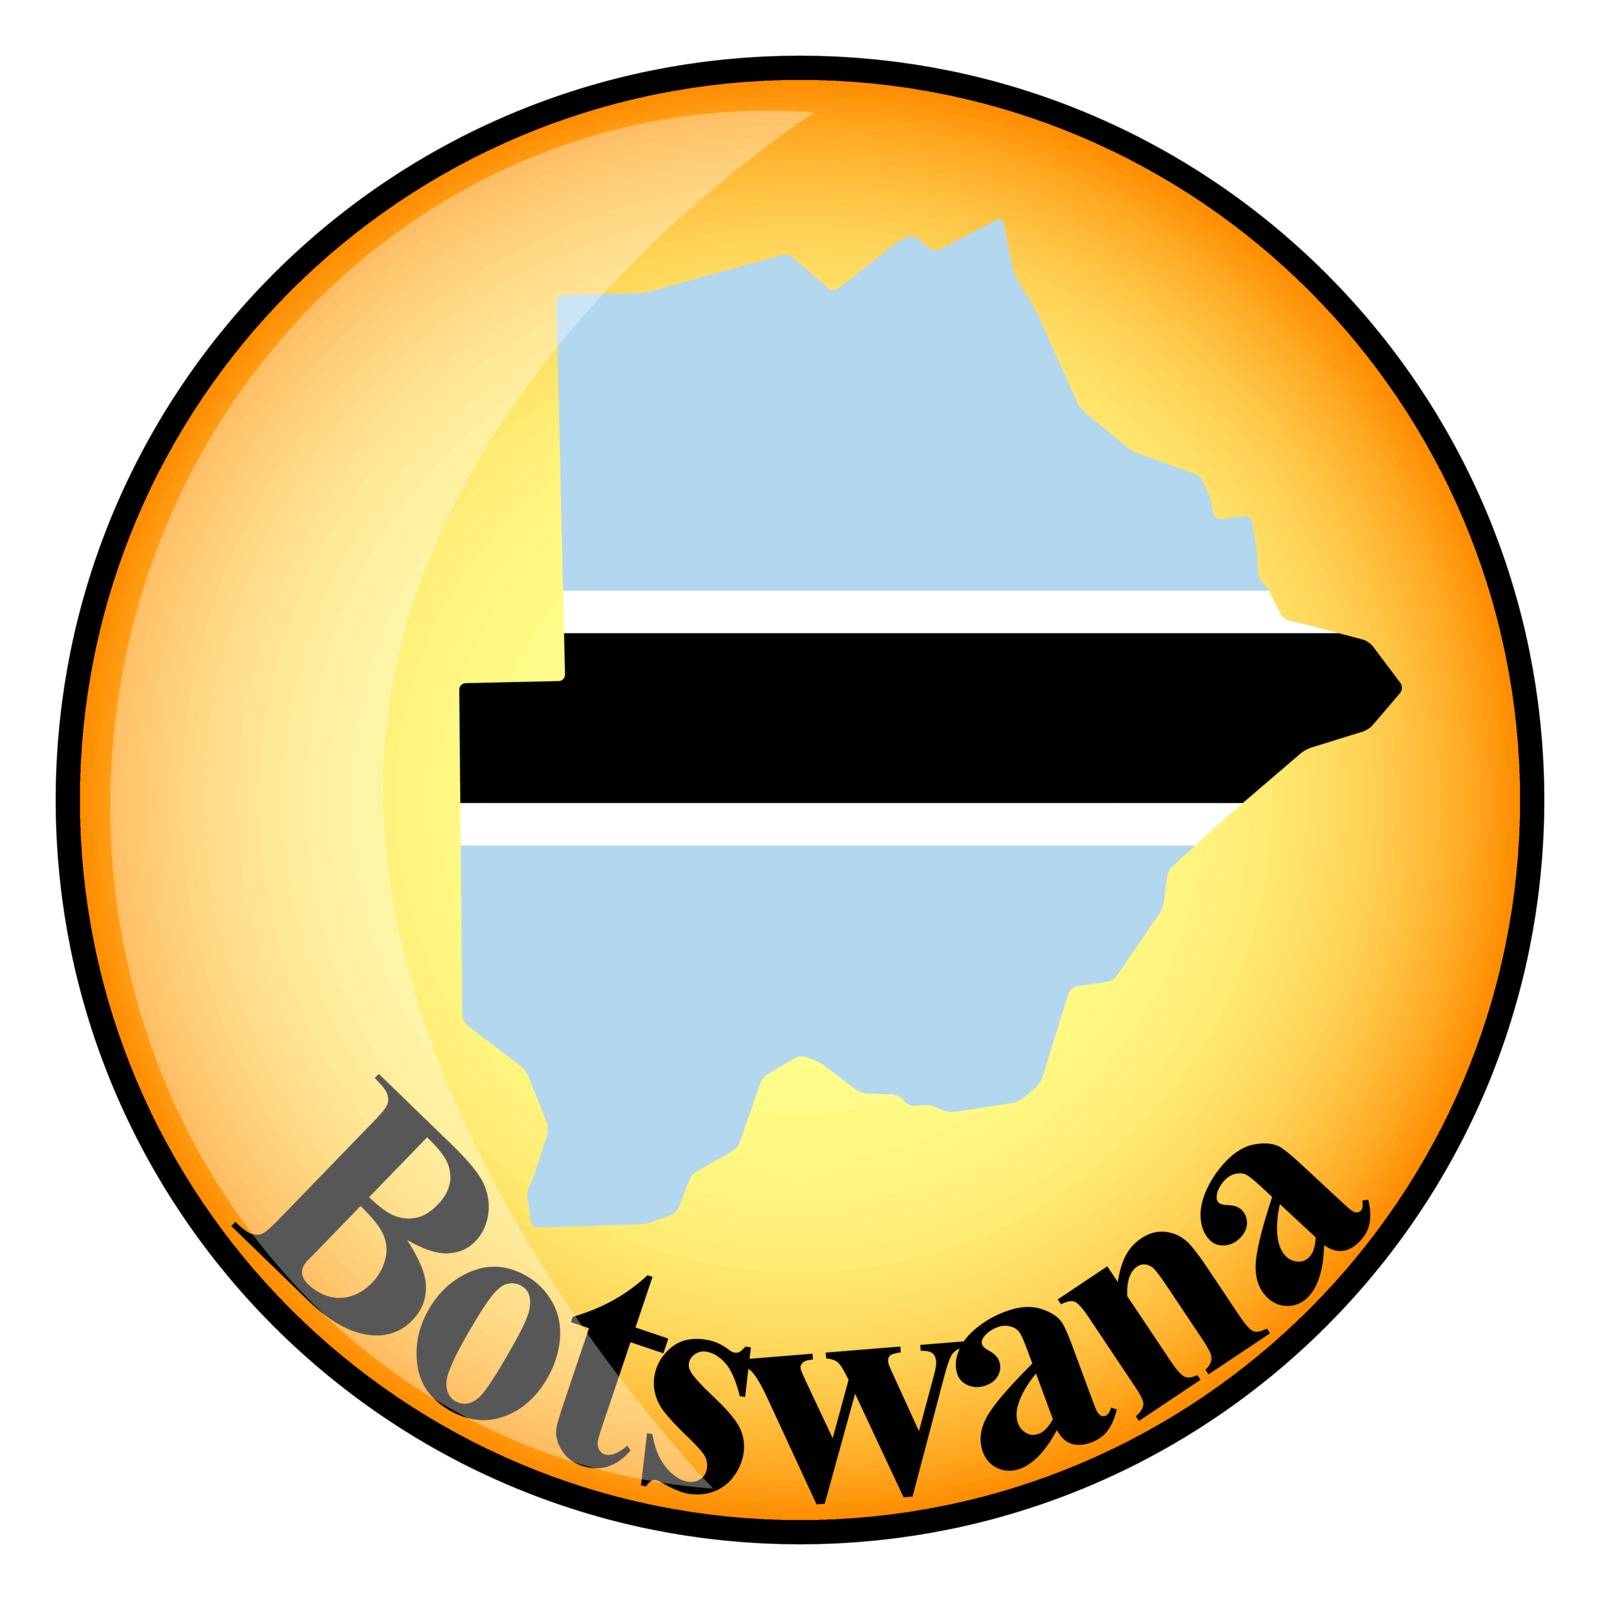 orange button with the image maps of button Botswana by mayboro